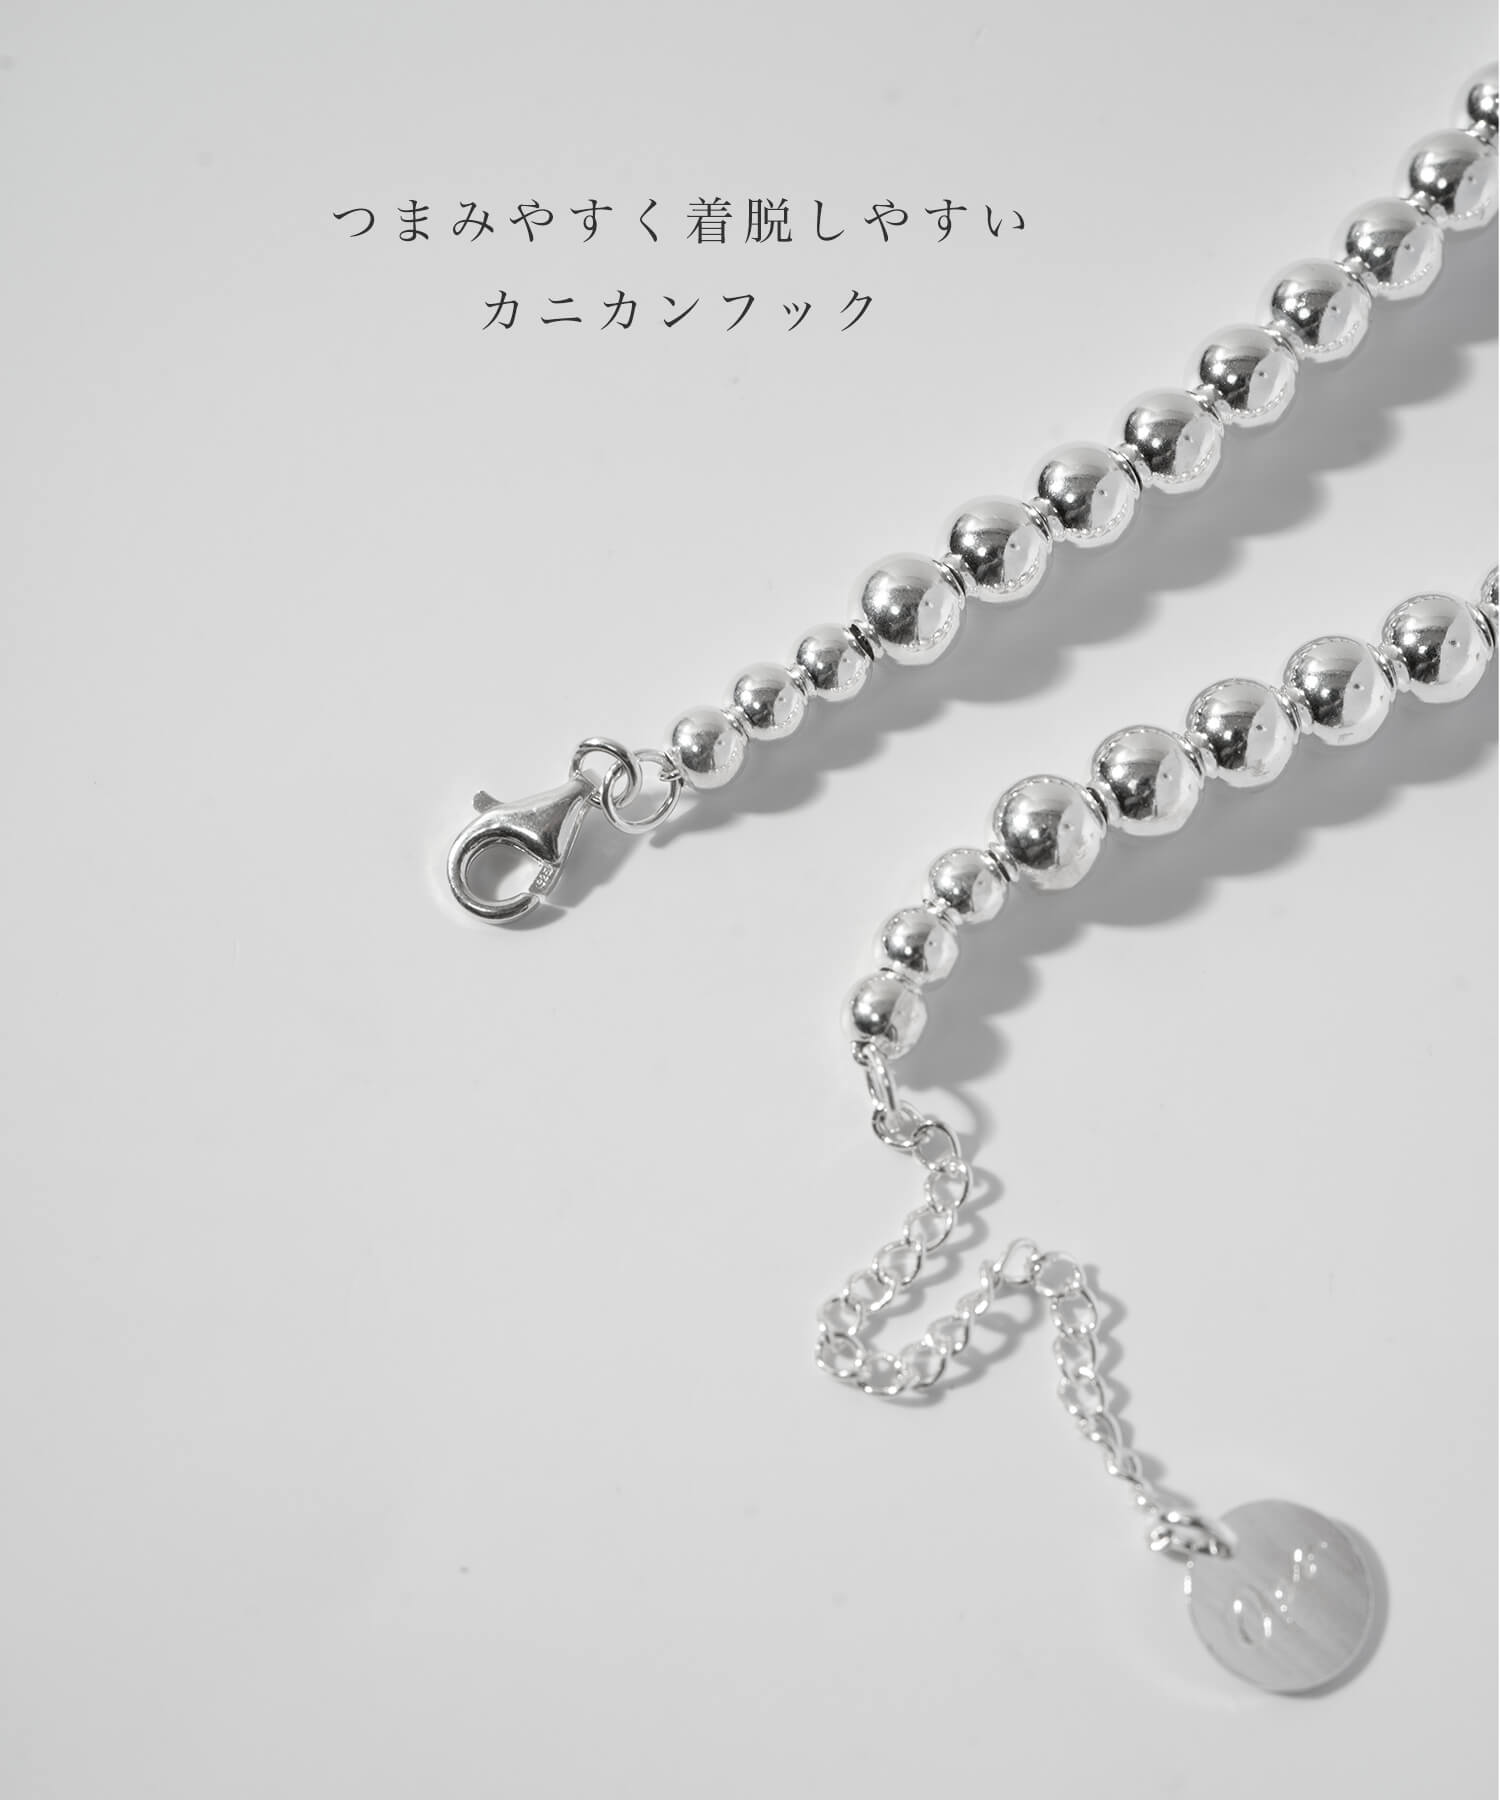 Silver925 Ball Chain Necklace -パルミラ ロング- | Ops.(オプス)公式